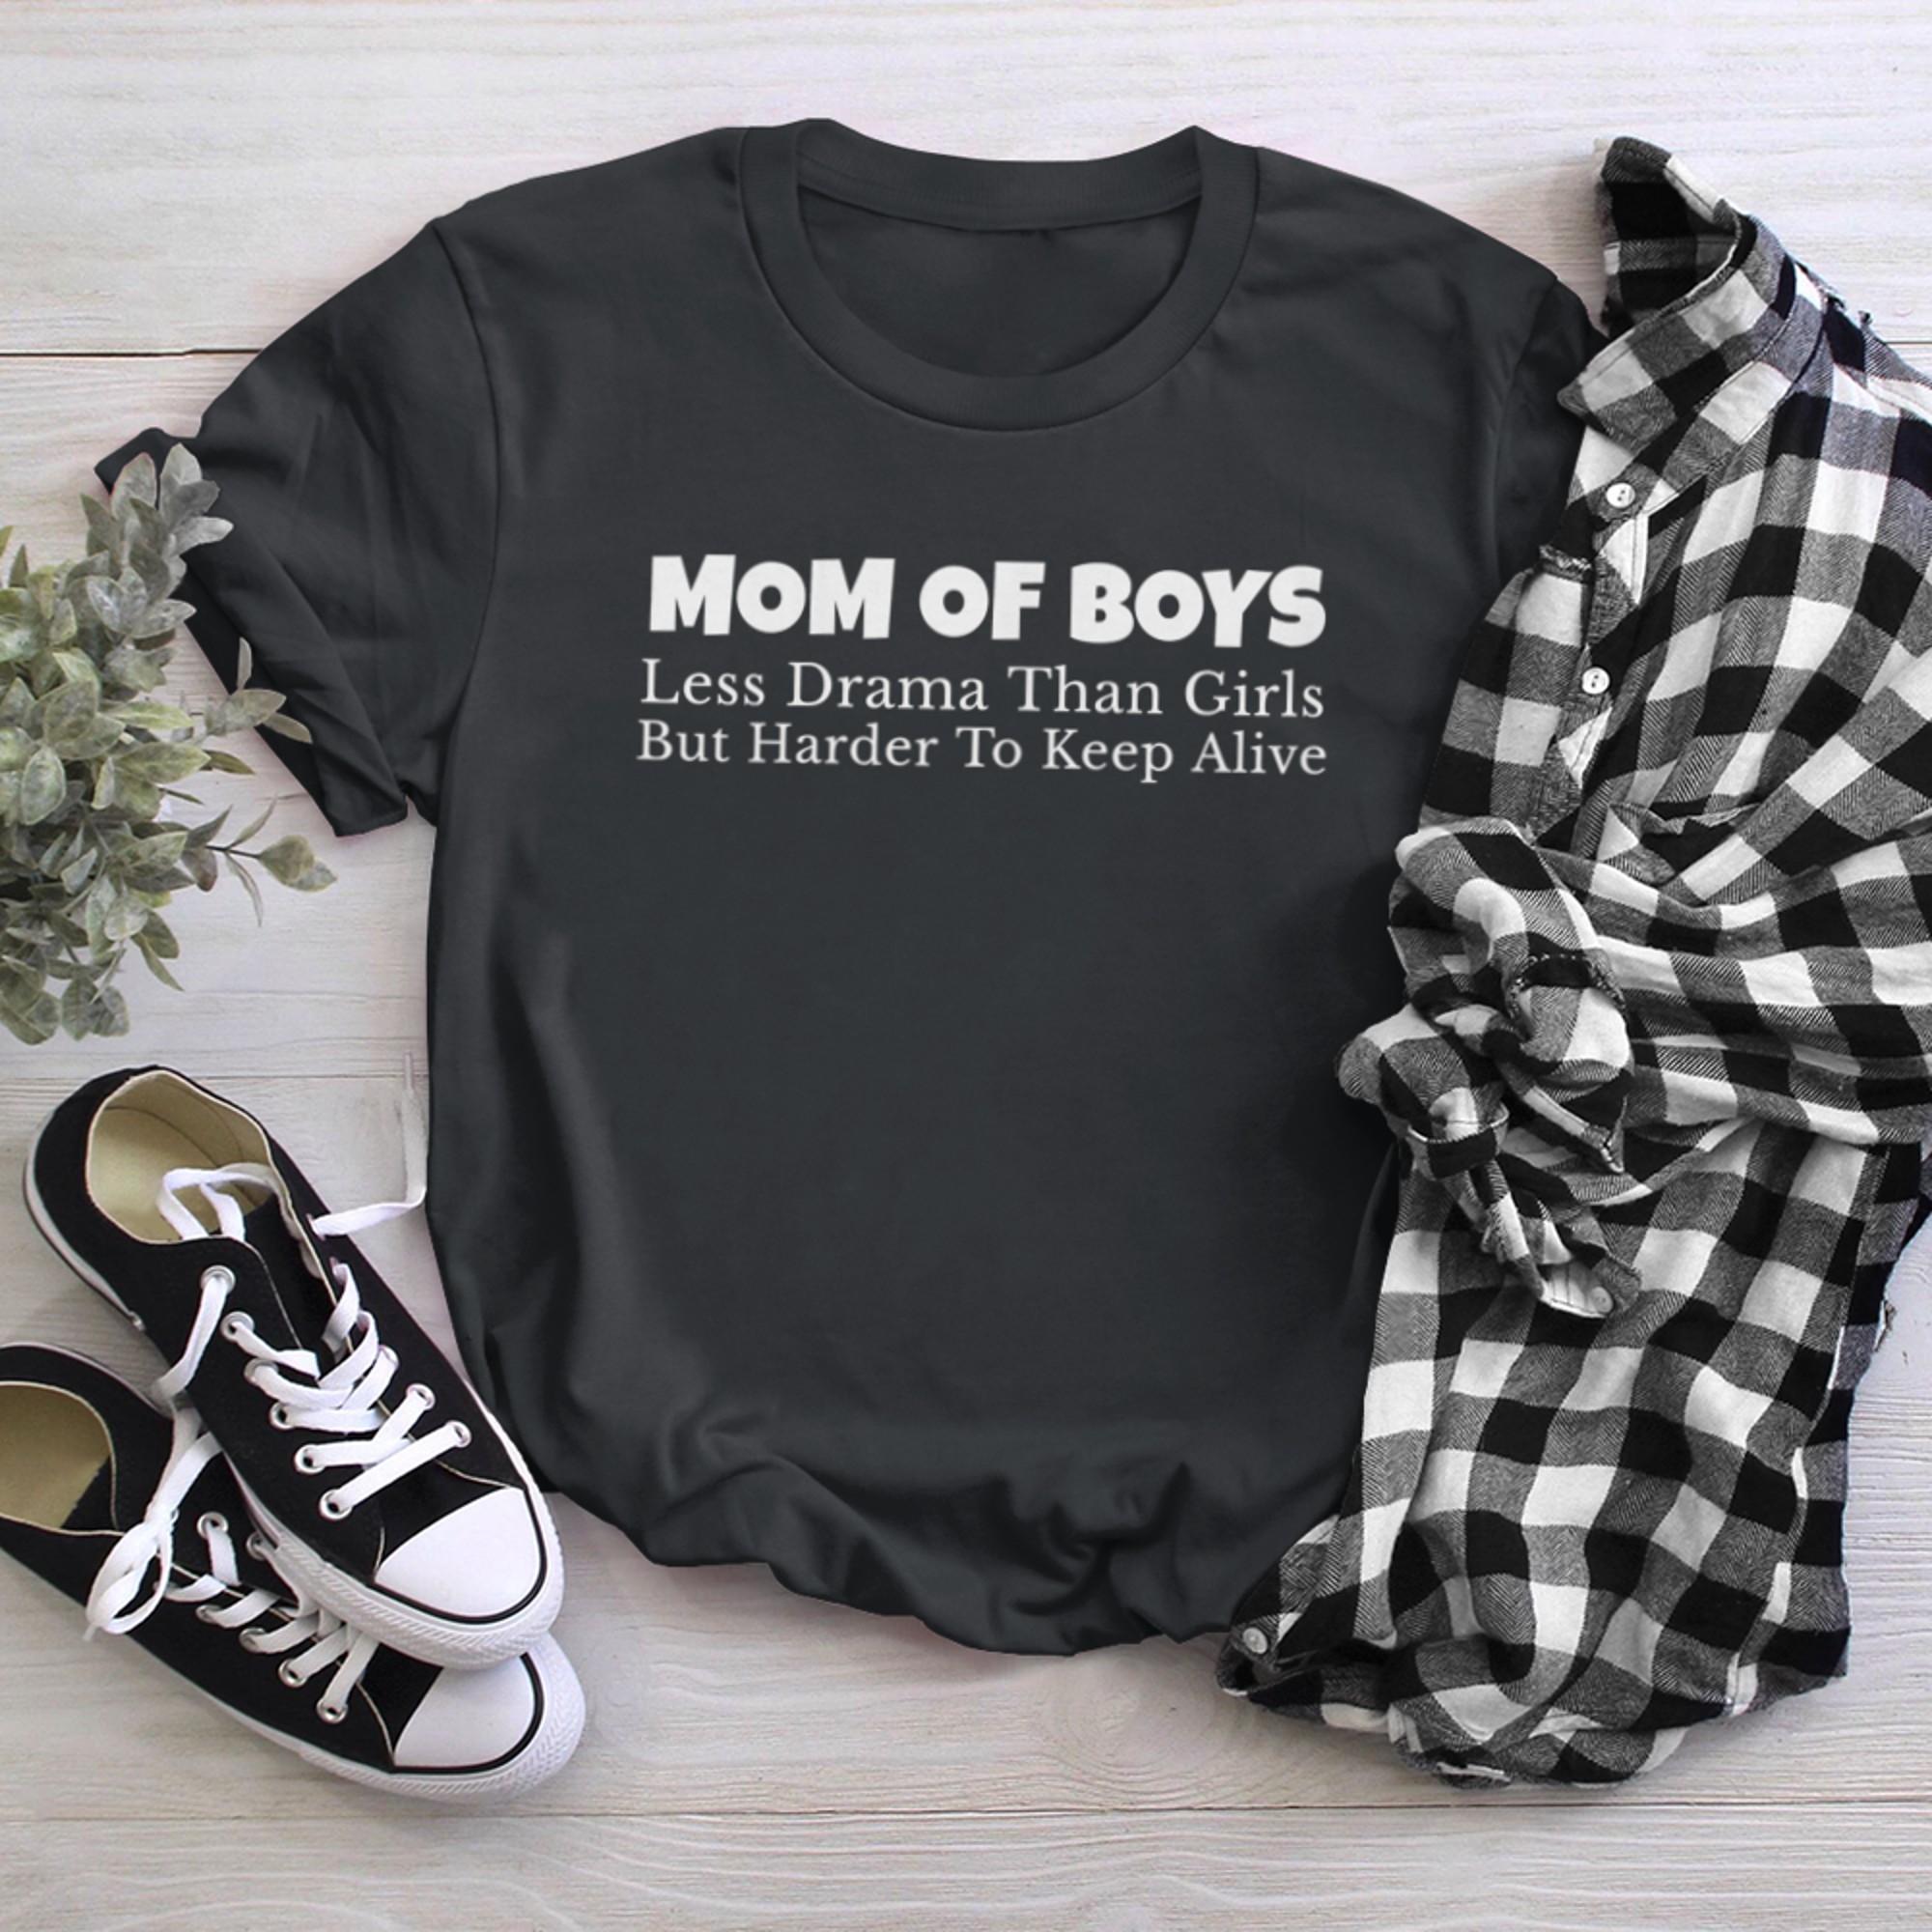 Mom Of Less Drama Than But Harder To Keep Alive (1) t-shirt black